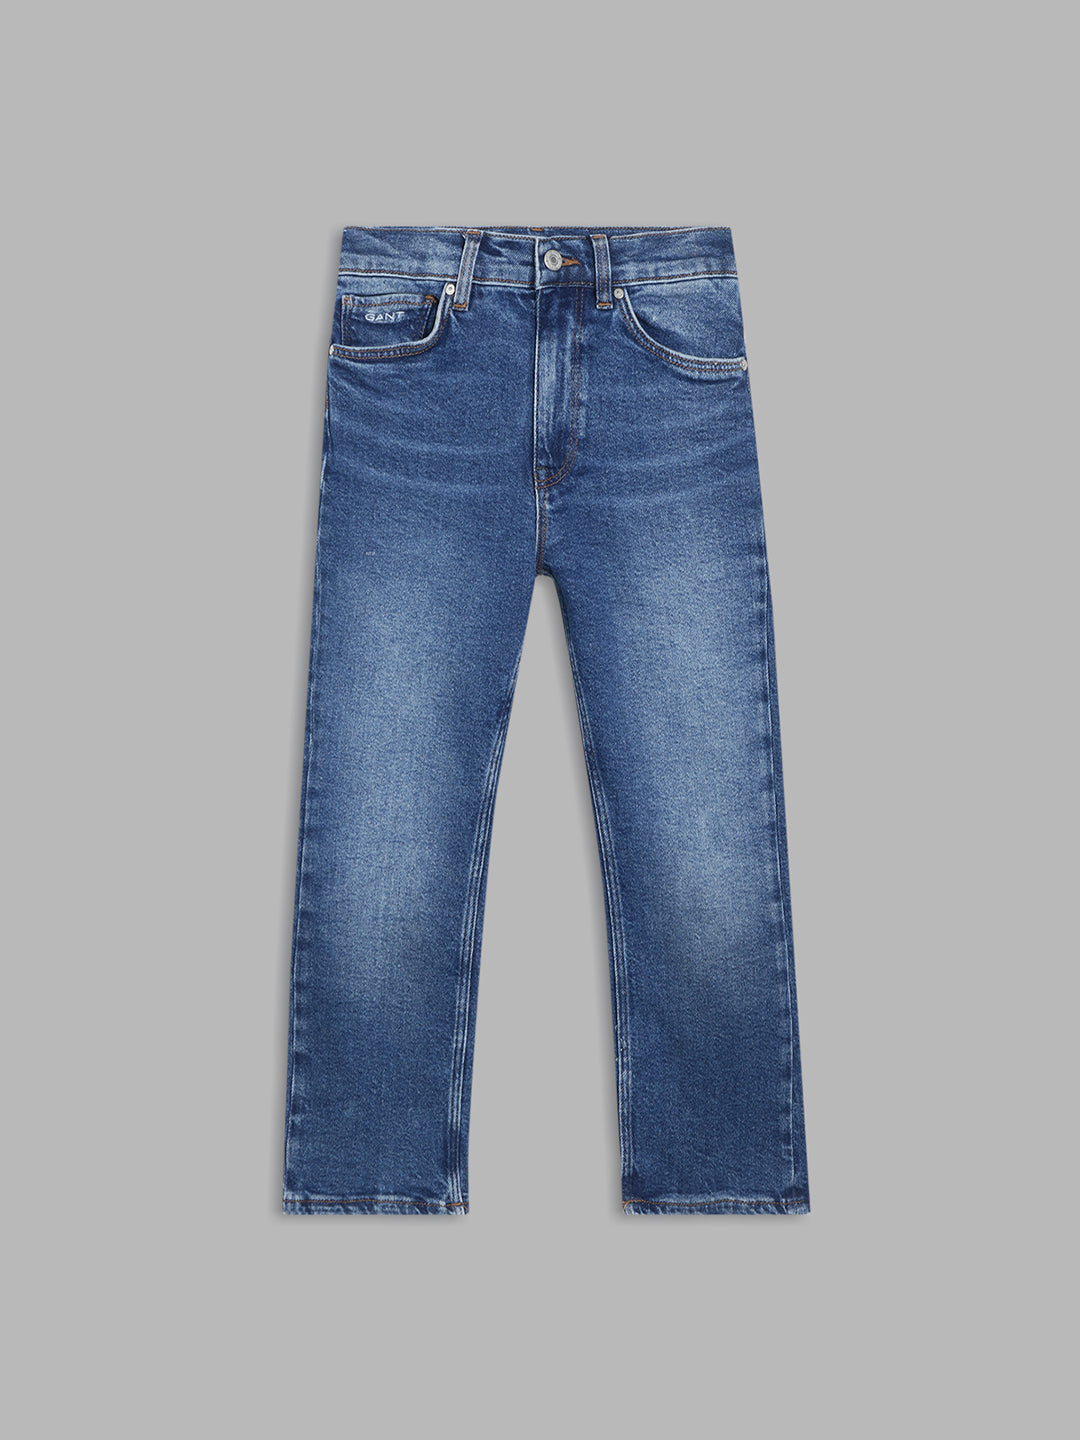 Gant Boys Comfort Relaxed Fit Light Fade Cotton Jeans